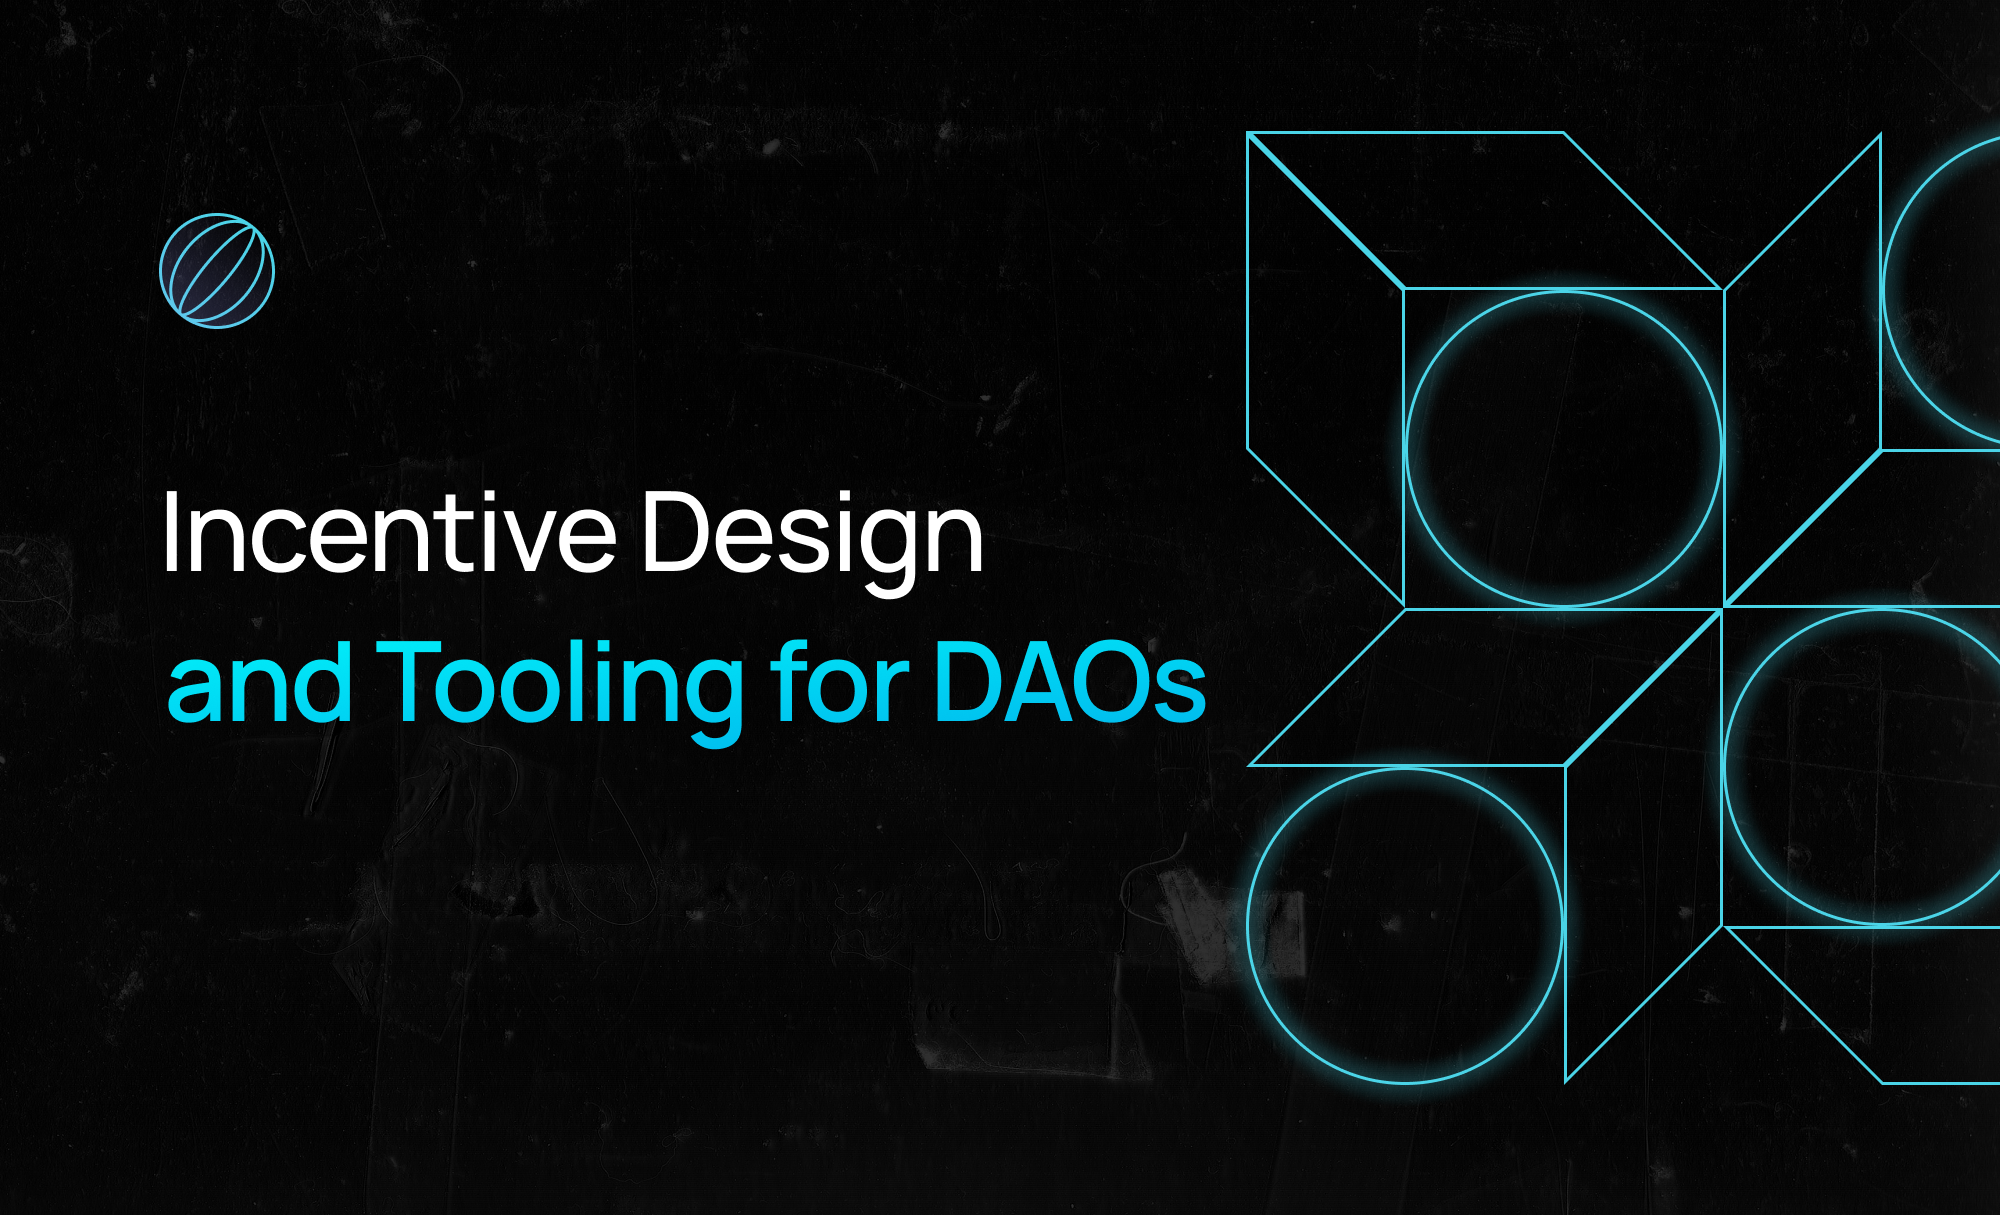 Thumbnail of Incentive Design & Tooling for DAOs